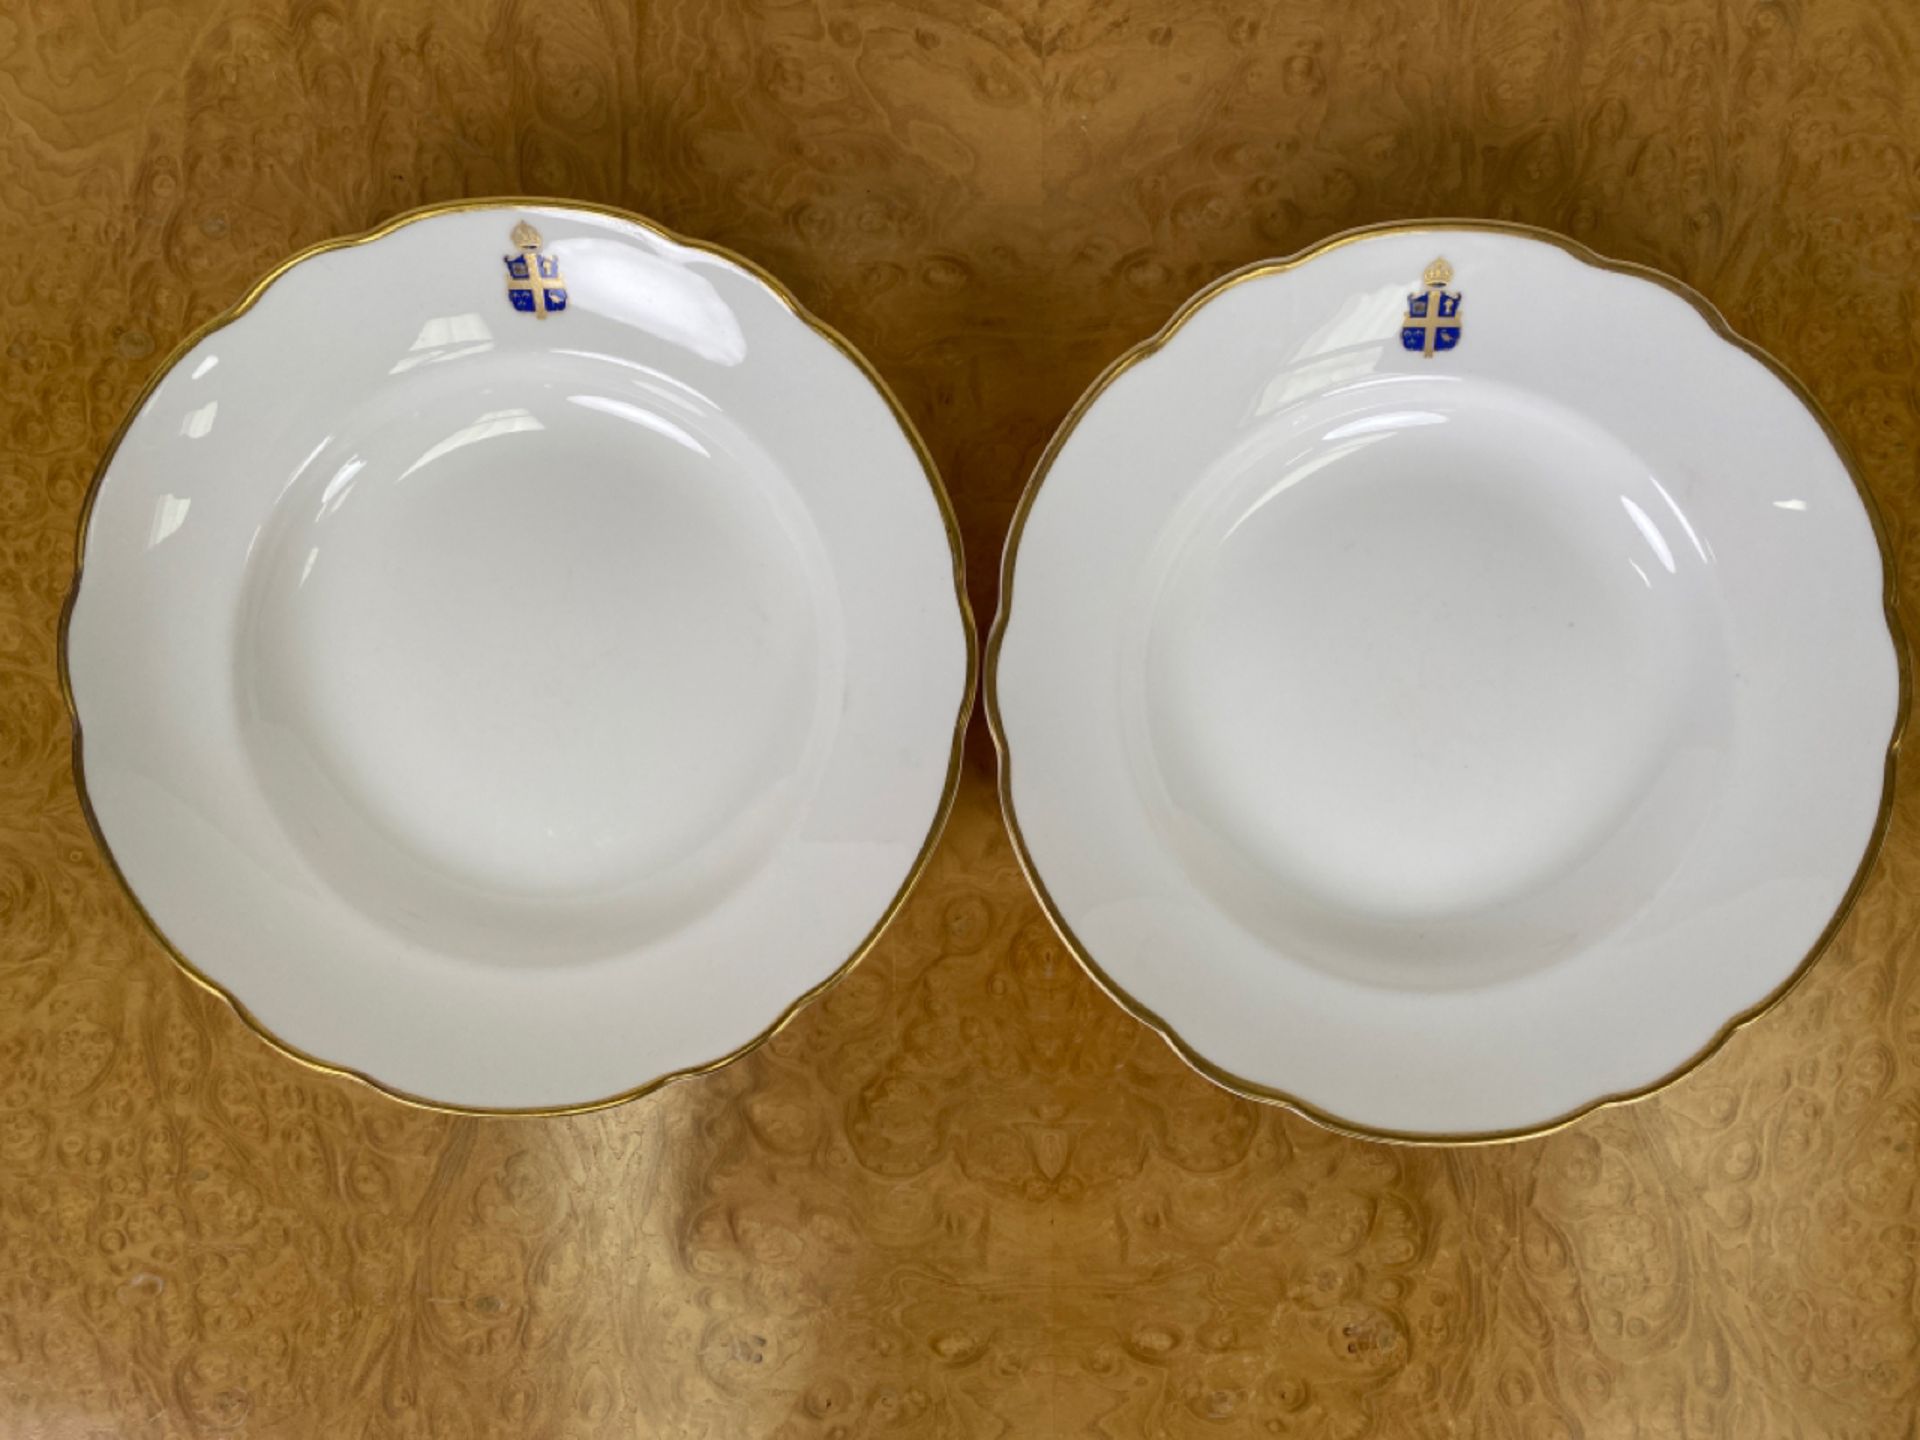 Set of Crested Crockery for Claridge's by Chommette 1884 - Image 25 of 30